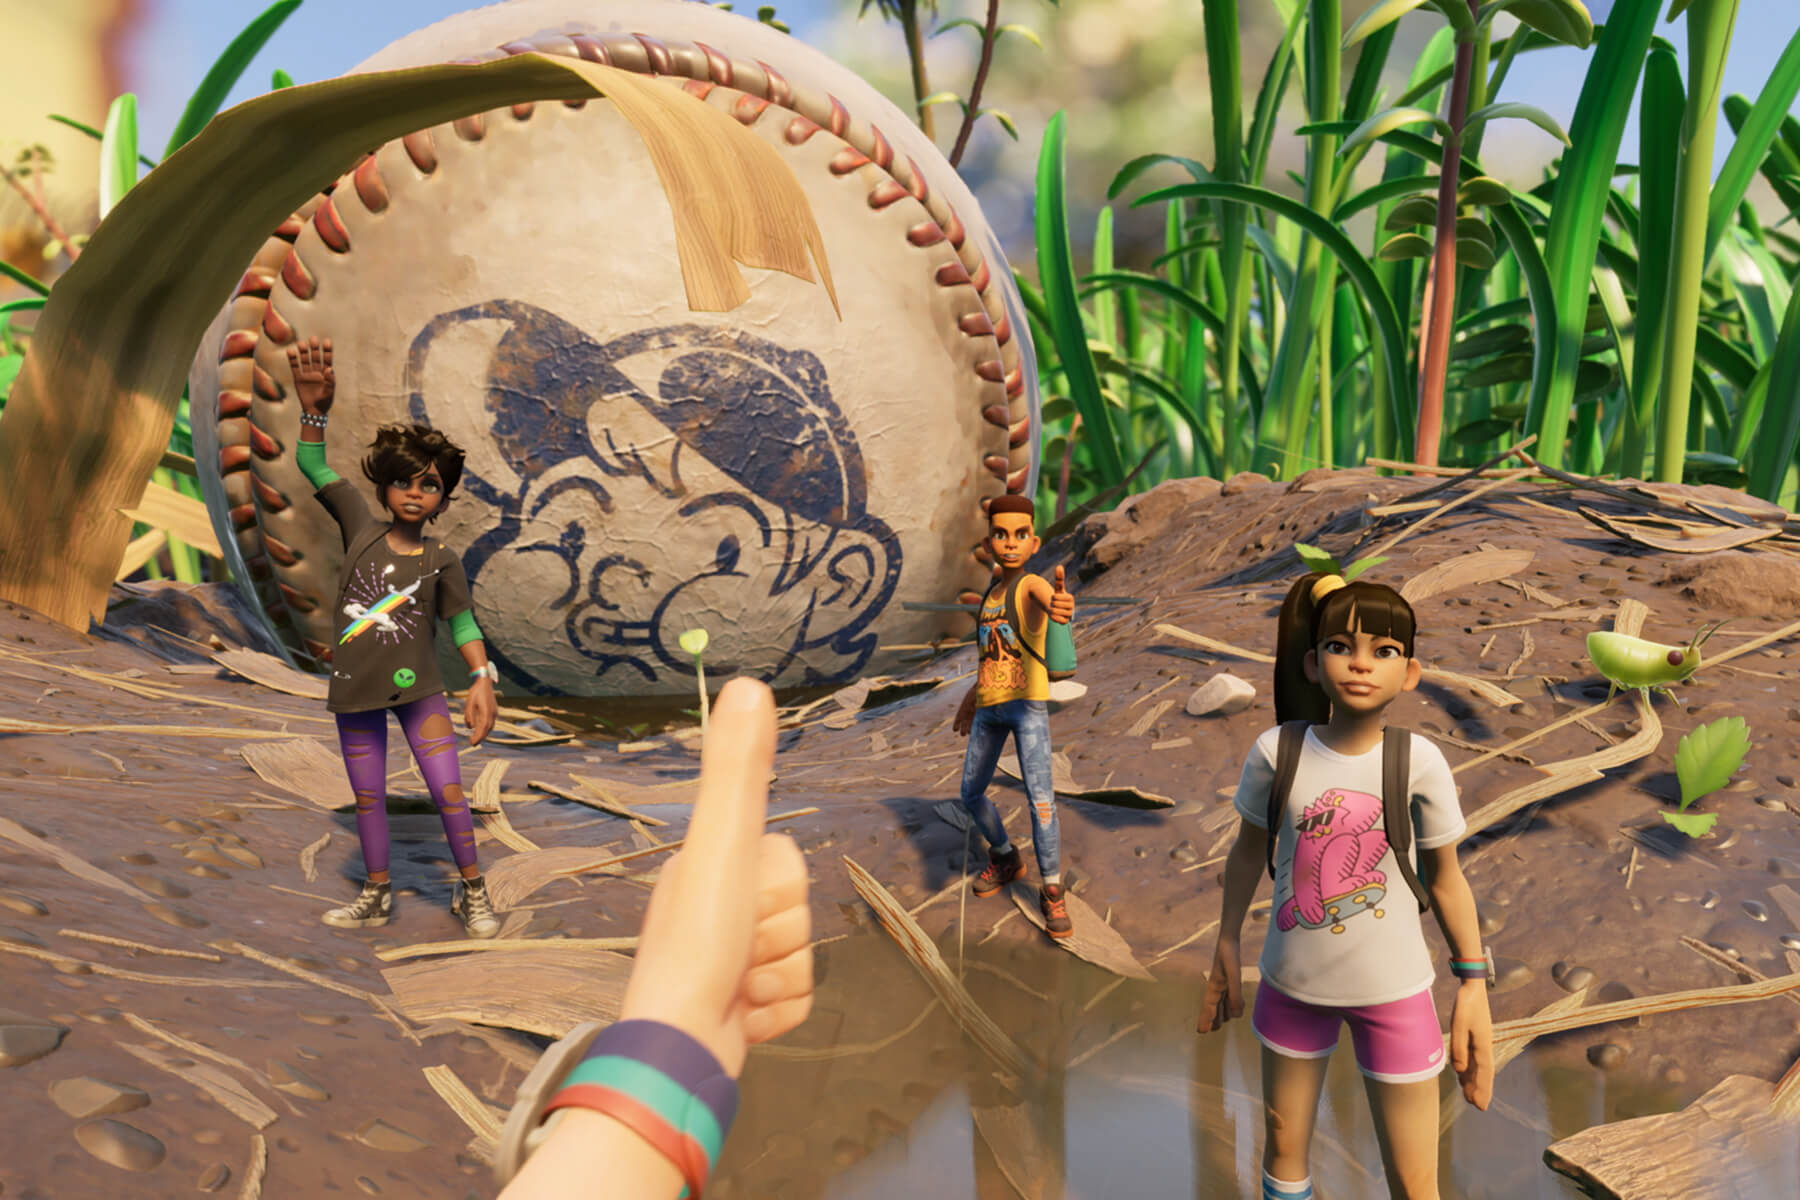 A Grounded screenshot showing the player giving the thumbs up to three tiny teens standing in front of a huge baseball.